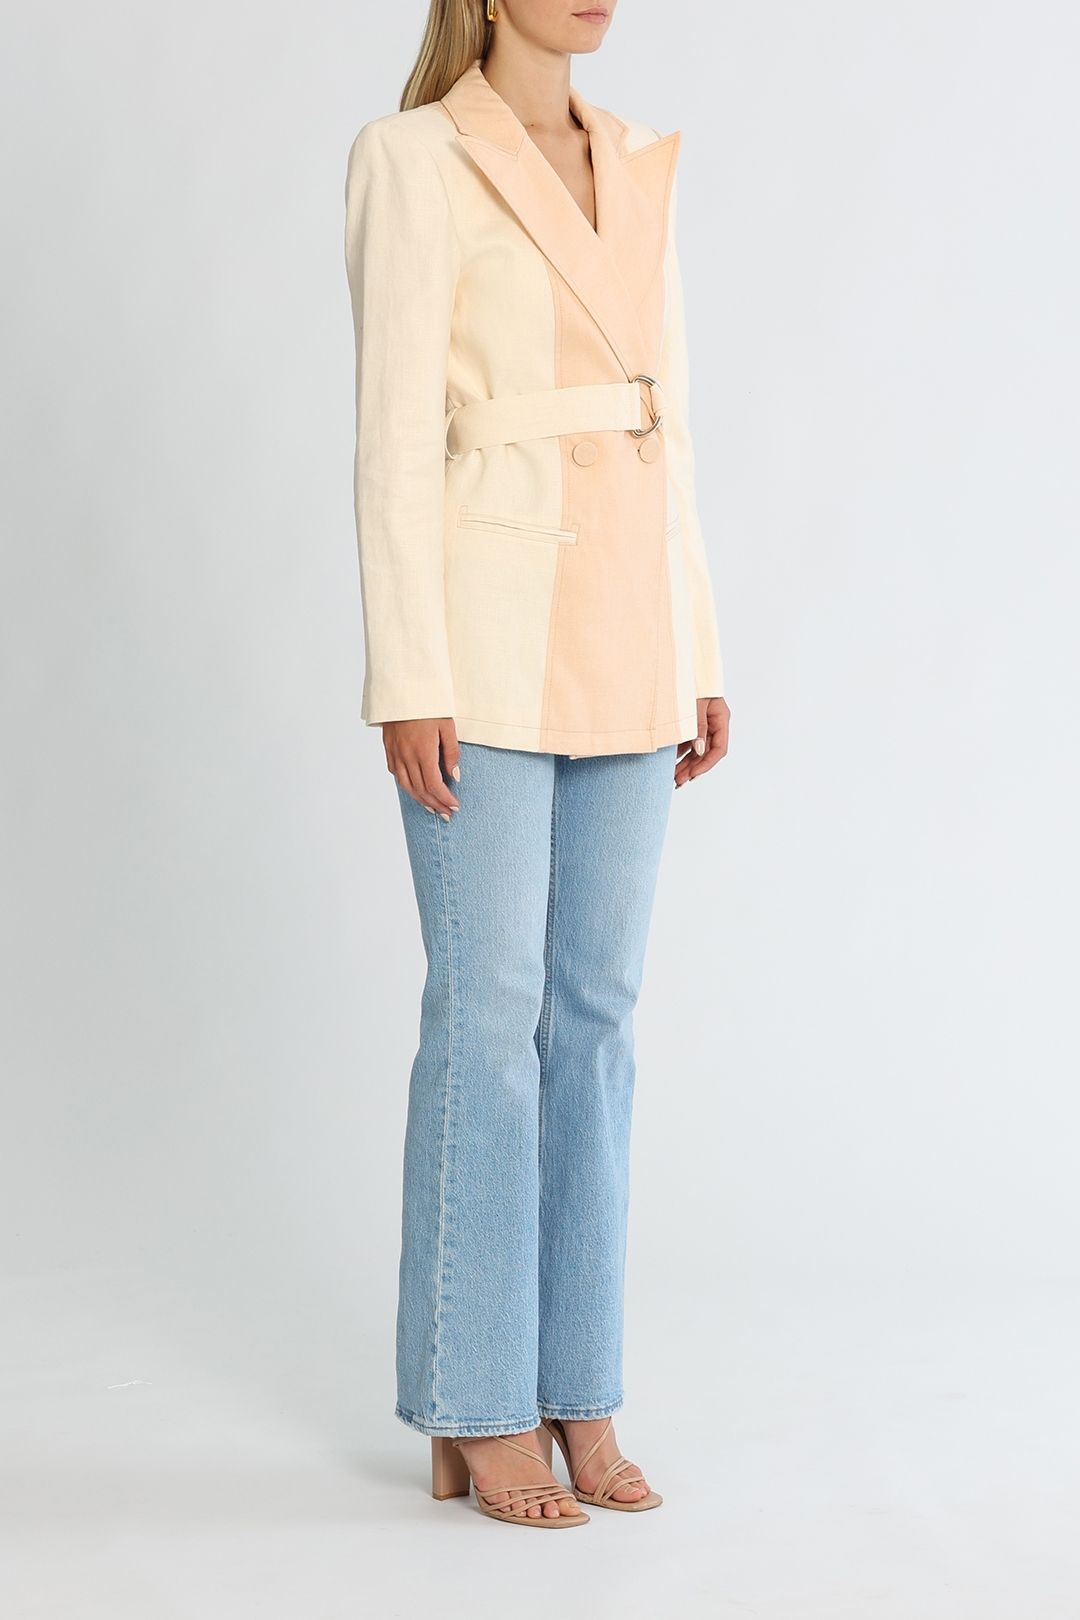 Significant Other Gilder Blazer Peach With Cream Long Sleeves